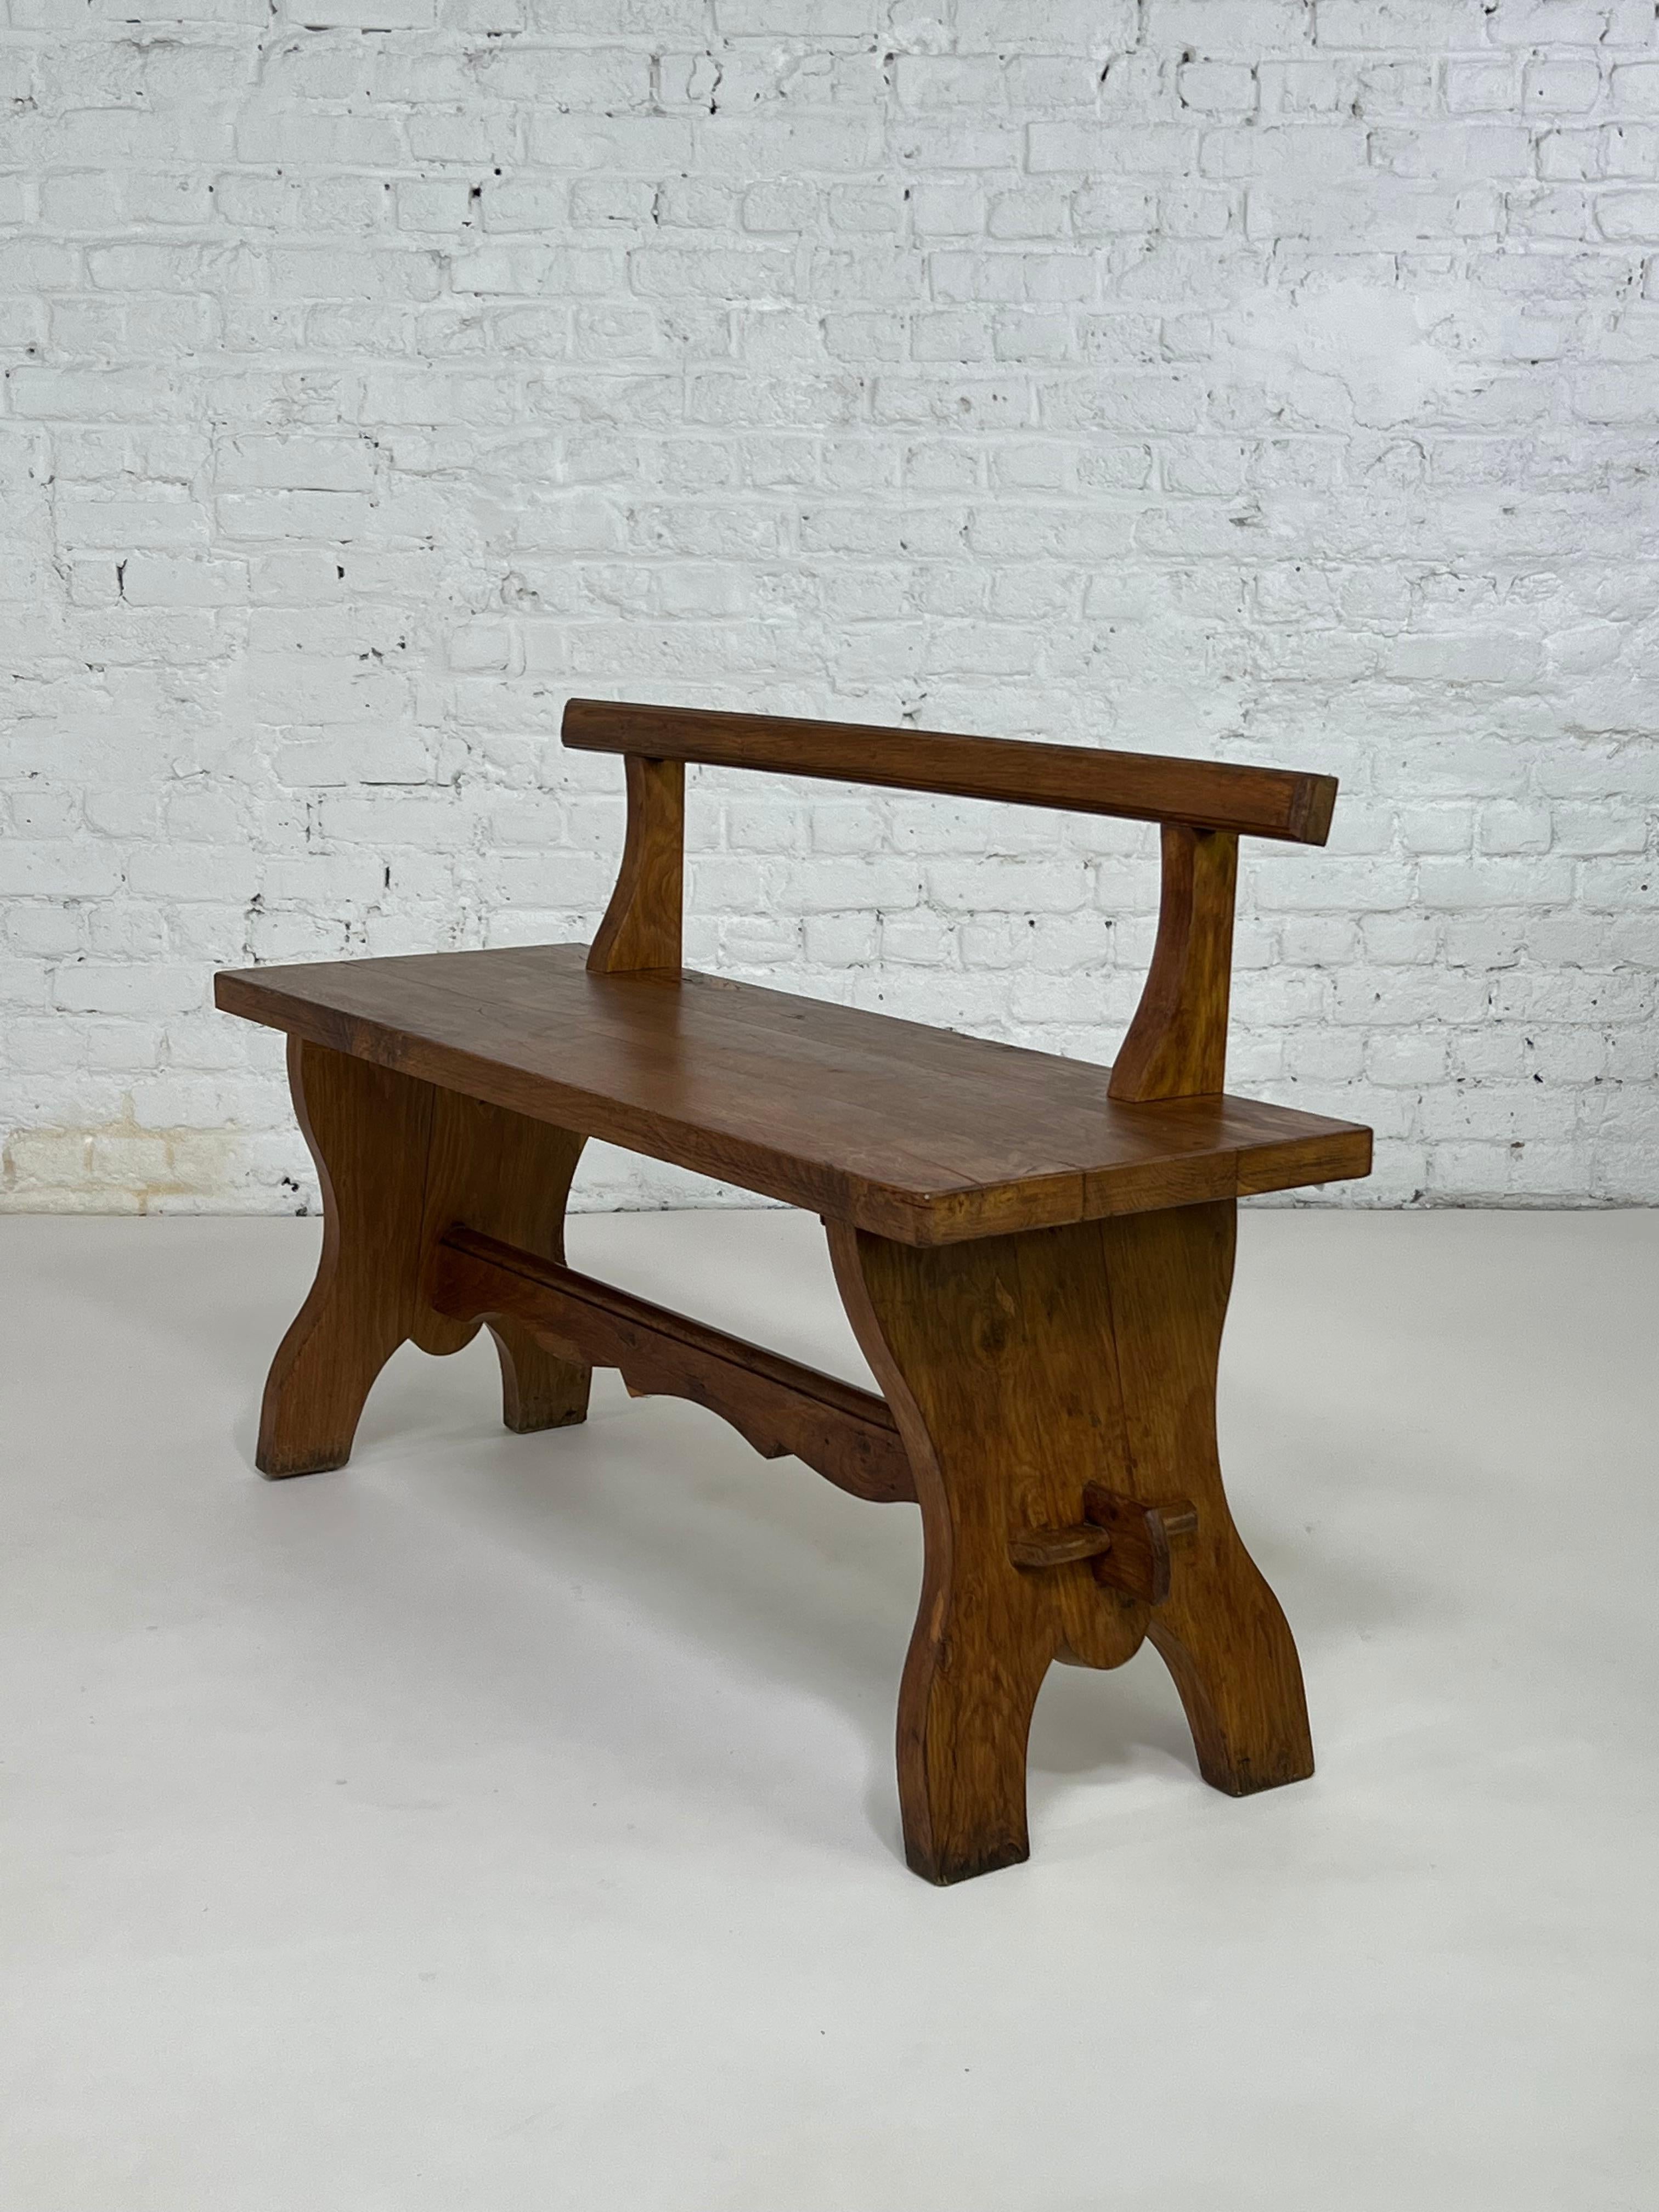 1950s French Design Oak Wooden Bench Seat For Sale 2